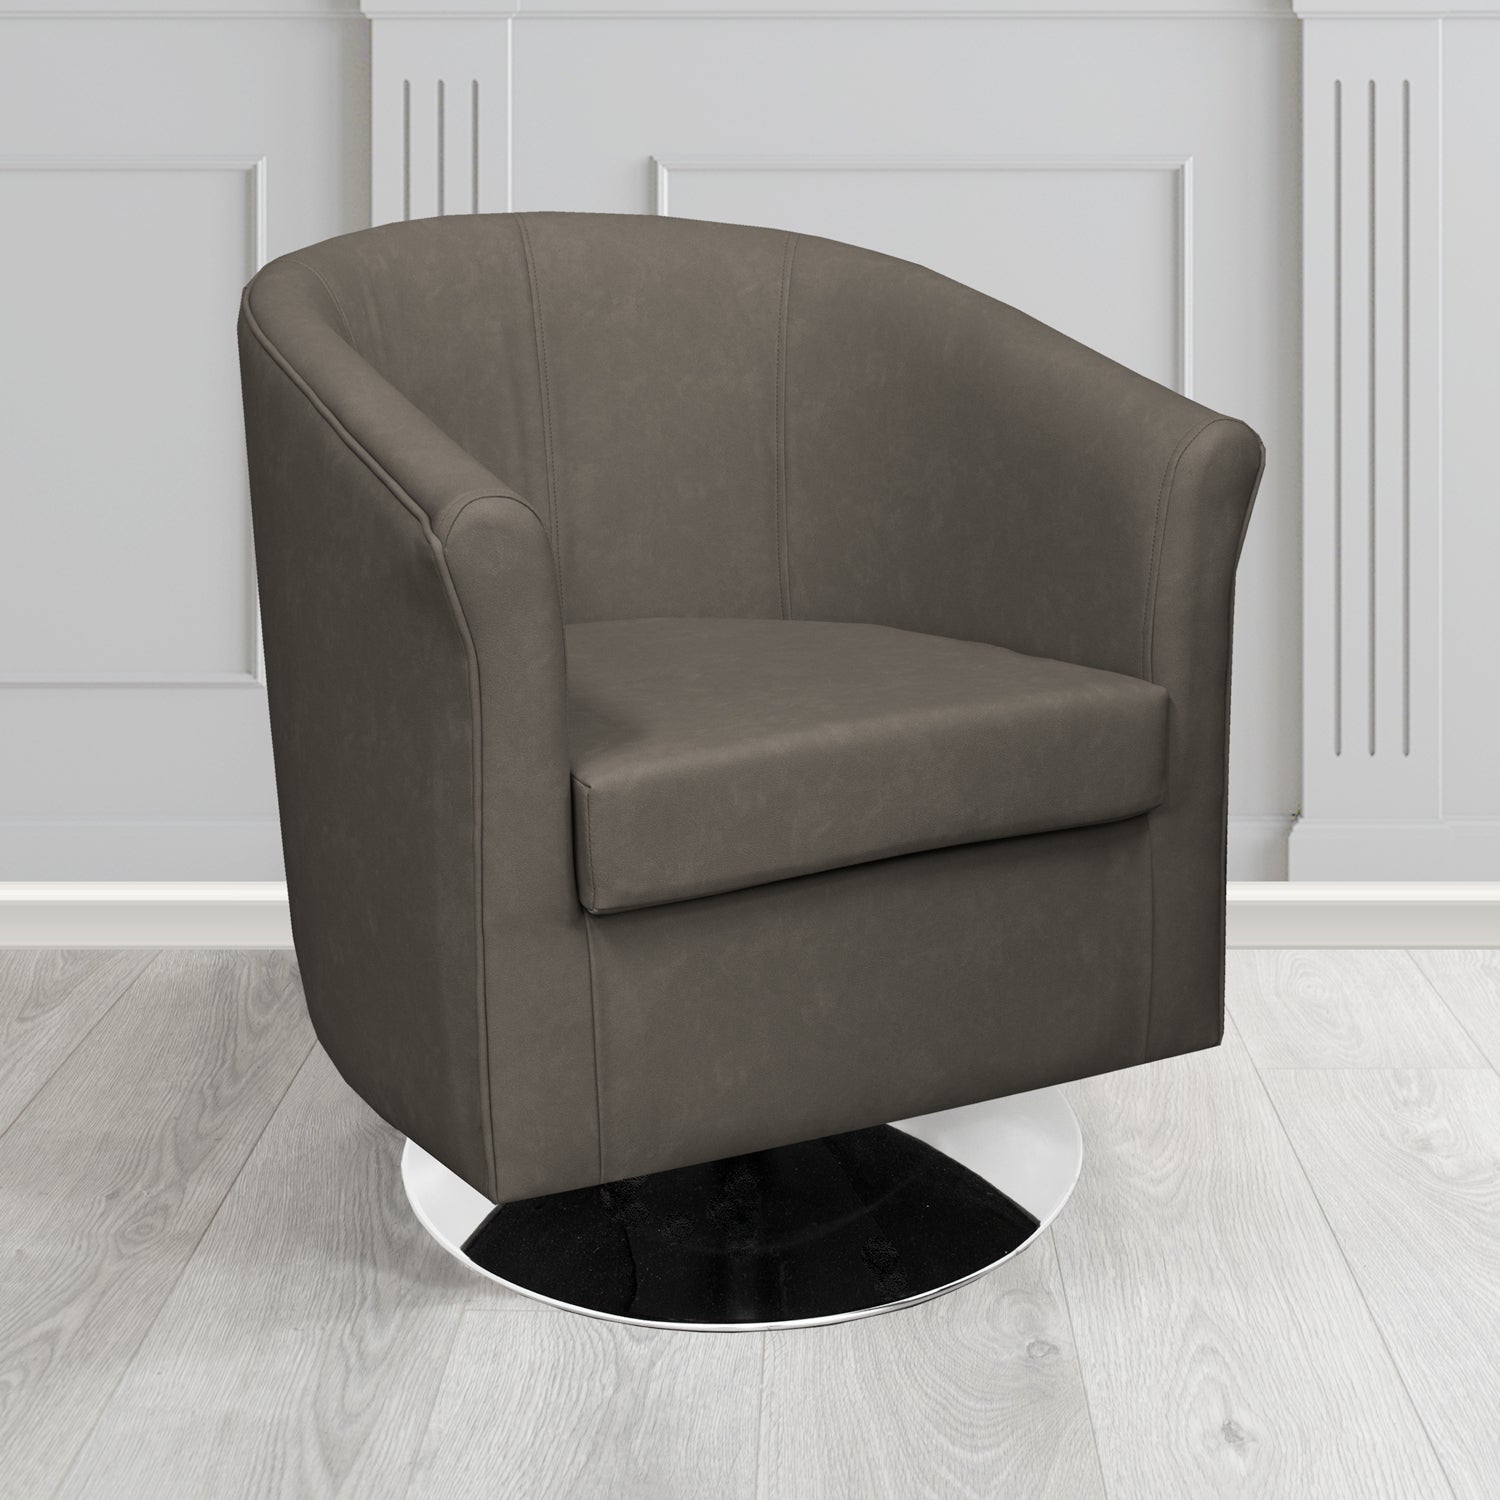 Tuscany Swivel Tub Chair in Infiniti Espresso INF1851 Antimicrobial Crib 5 Faux Leather - The Tub Chair Shop